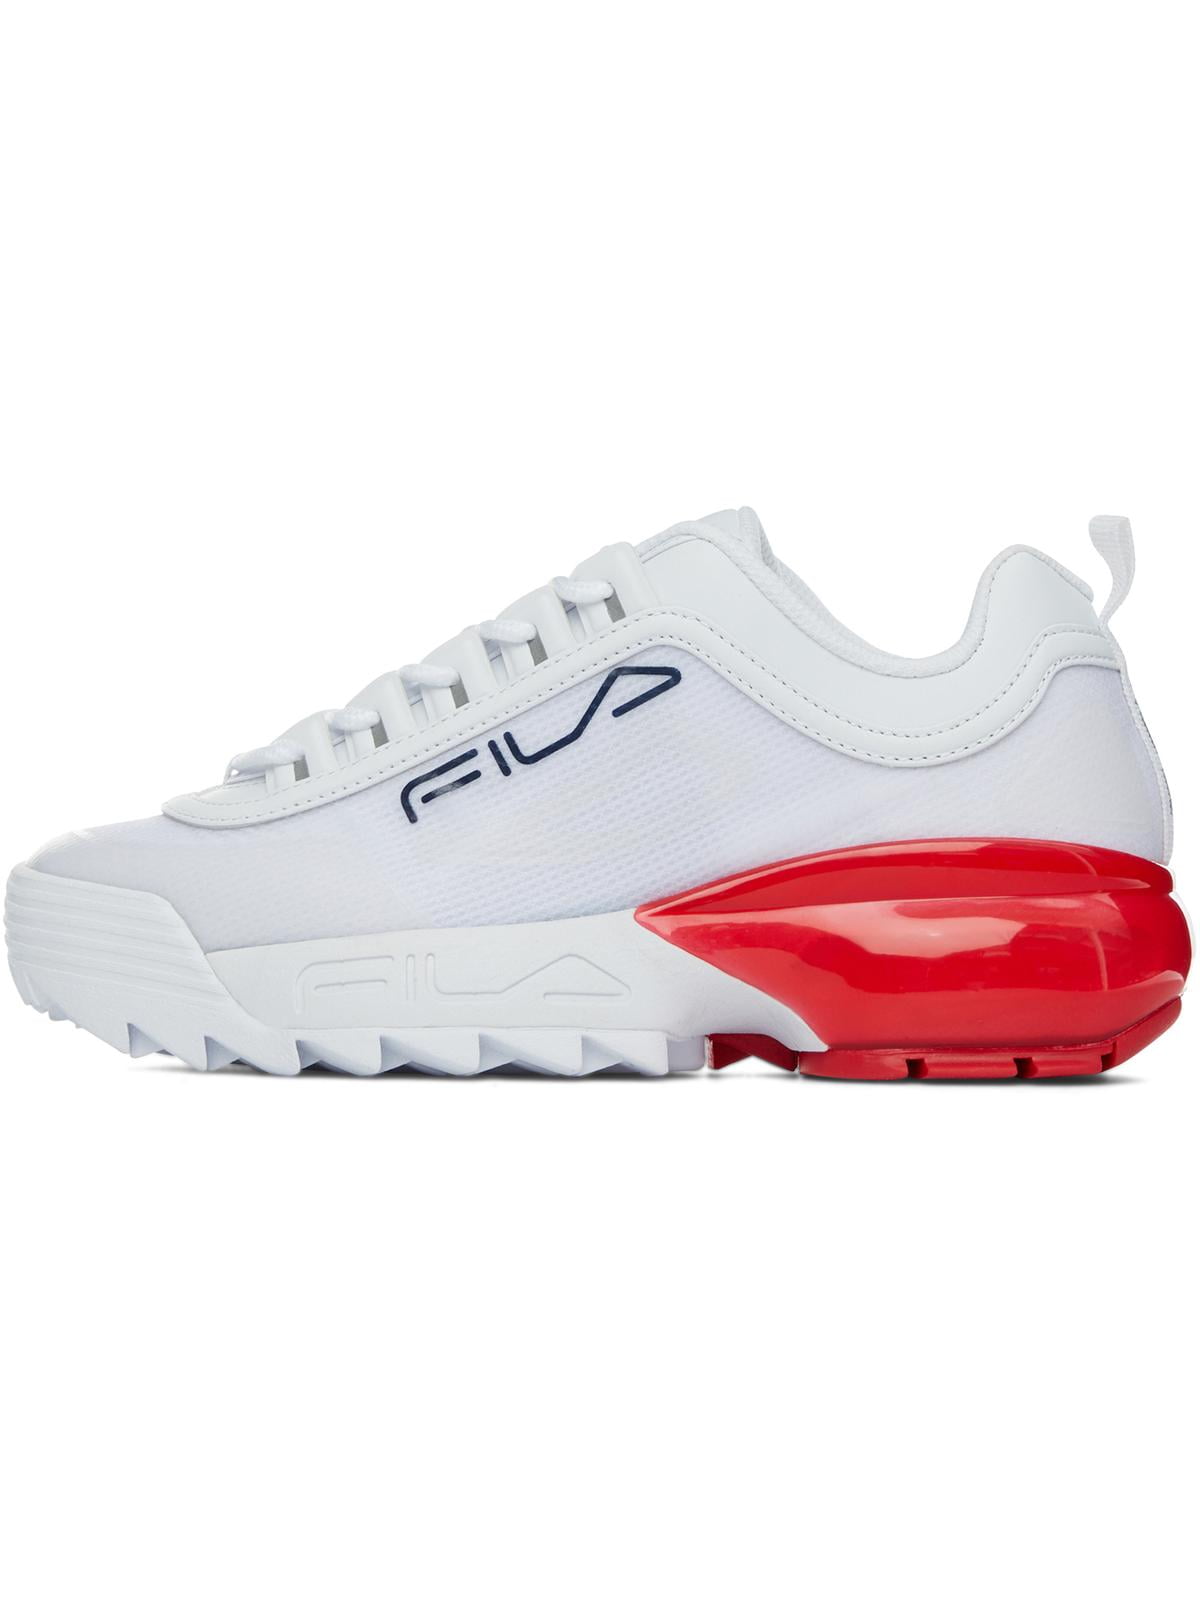 Fila Disruptor 2A Women's Faux Leather Athletic Sneakers White Size 9 ...